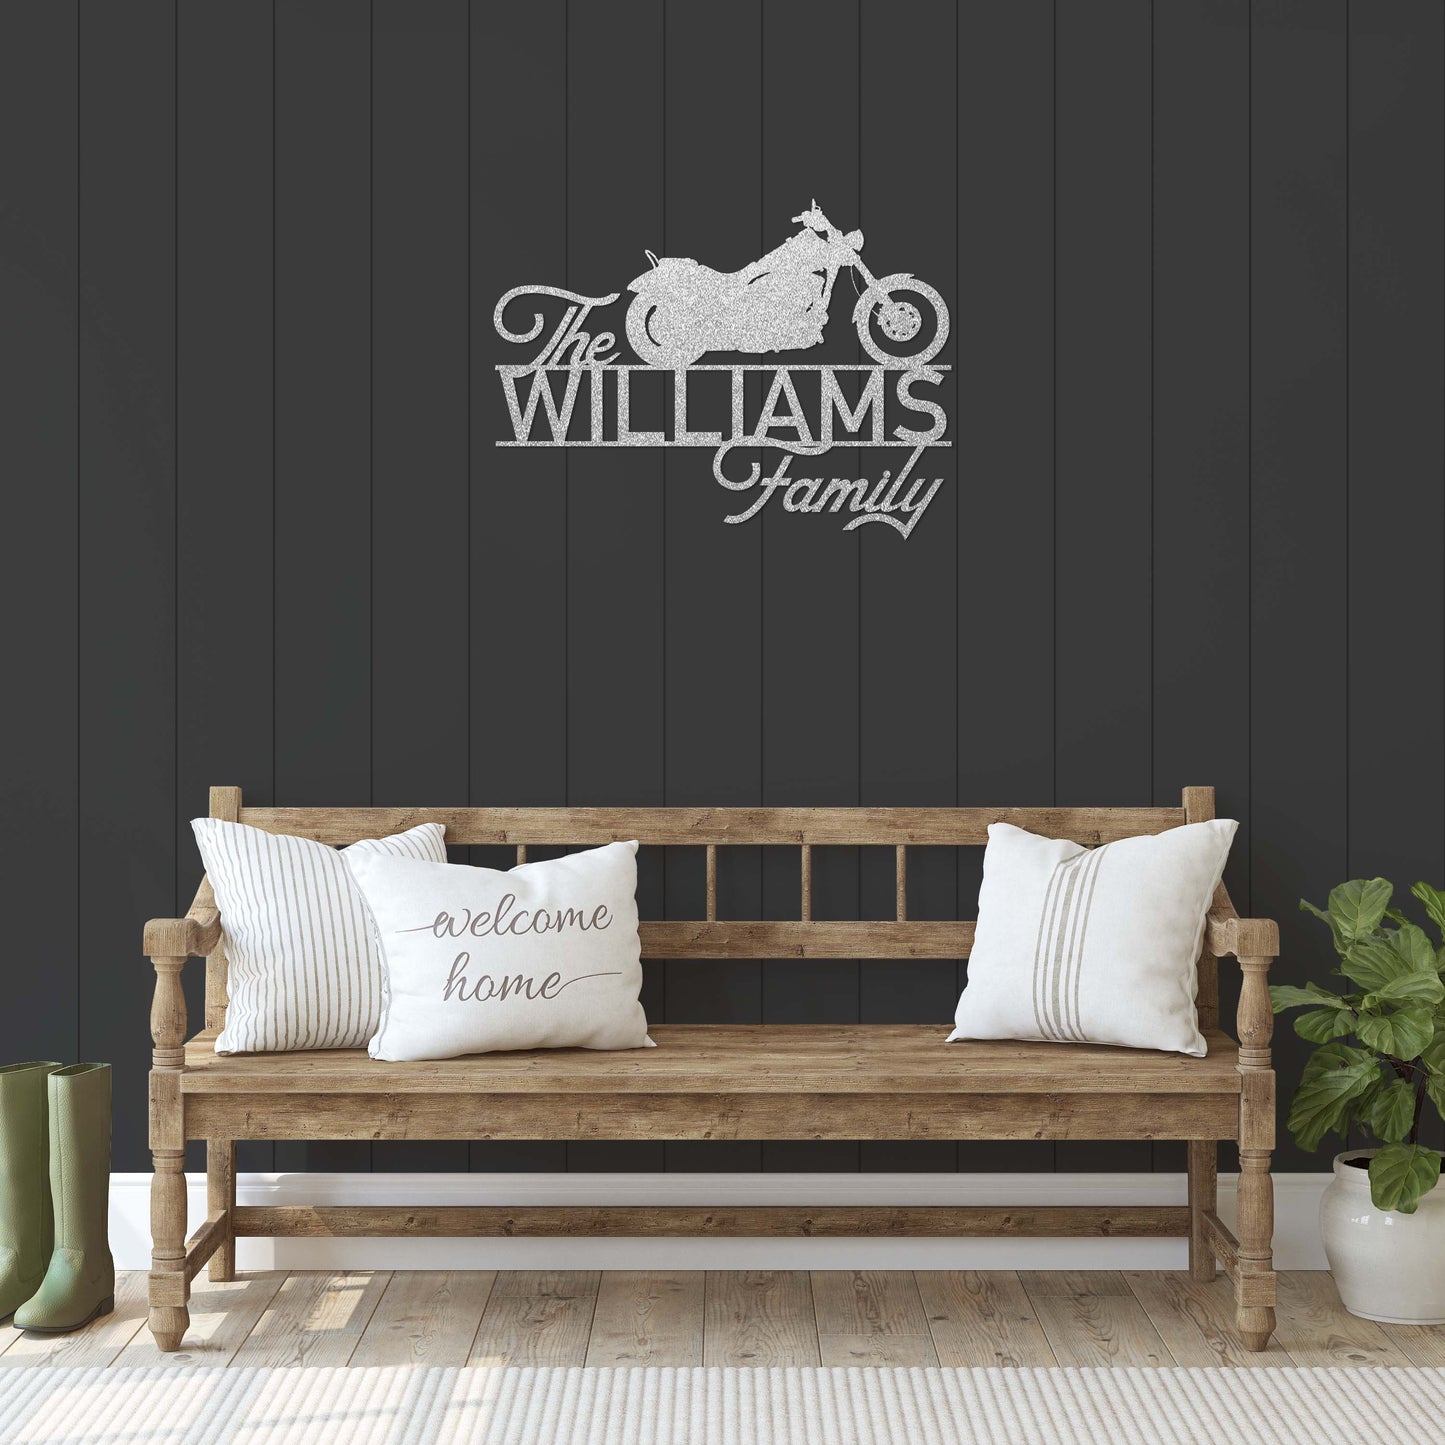 Motorcycle Family - PERSONALIZED Metal Wall Art (🇺🇸Made In The USA) - Original